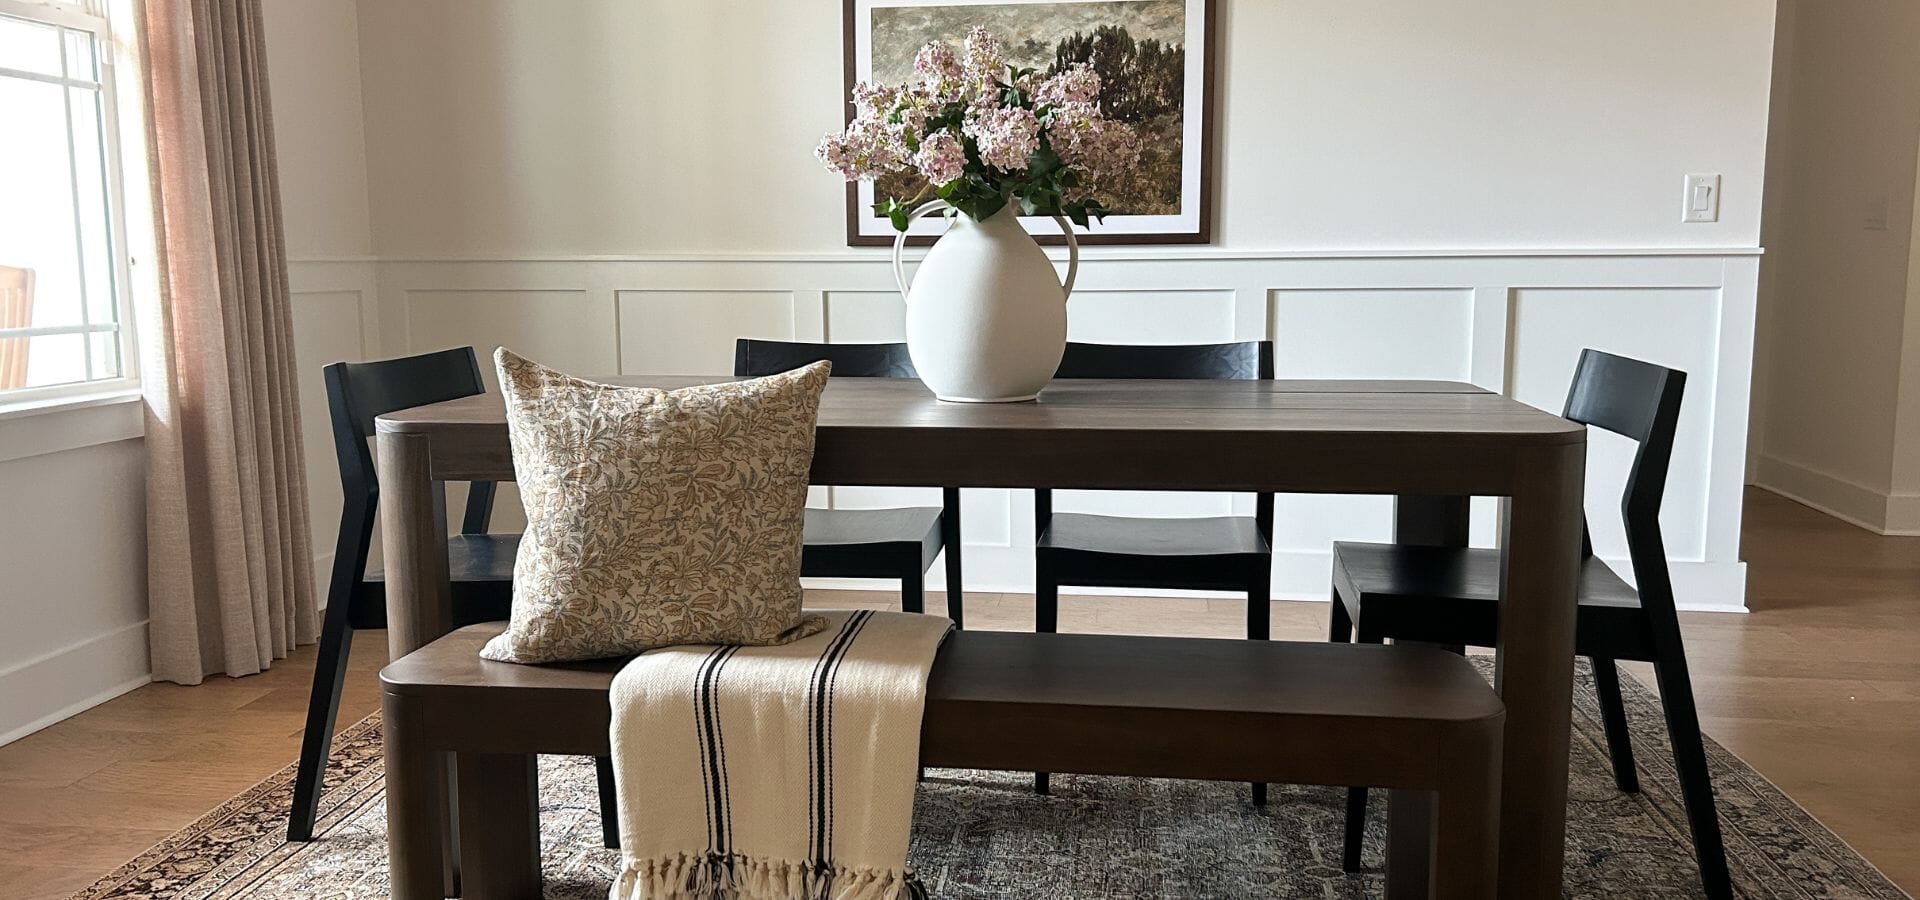 How to Choose a Dining Chair for Your Entertaining Space